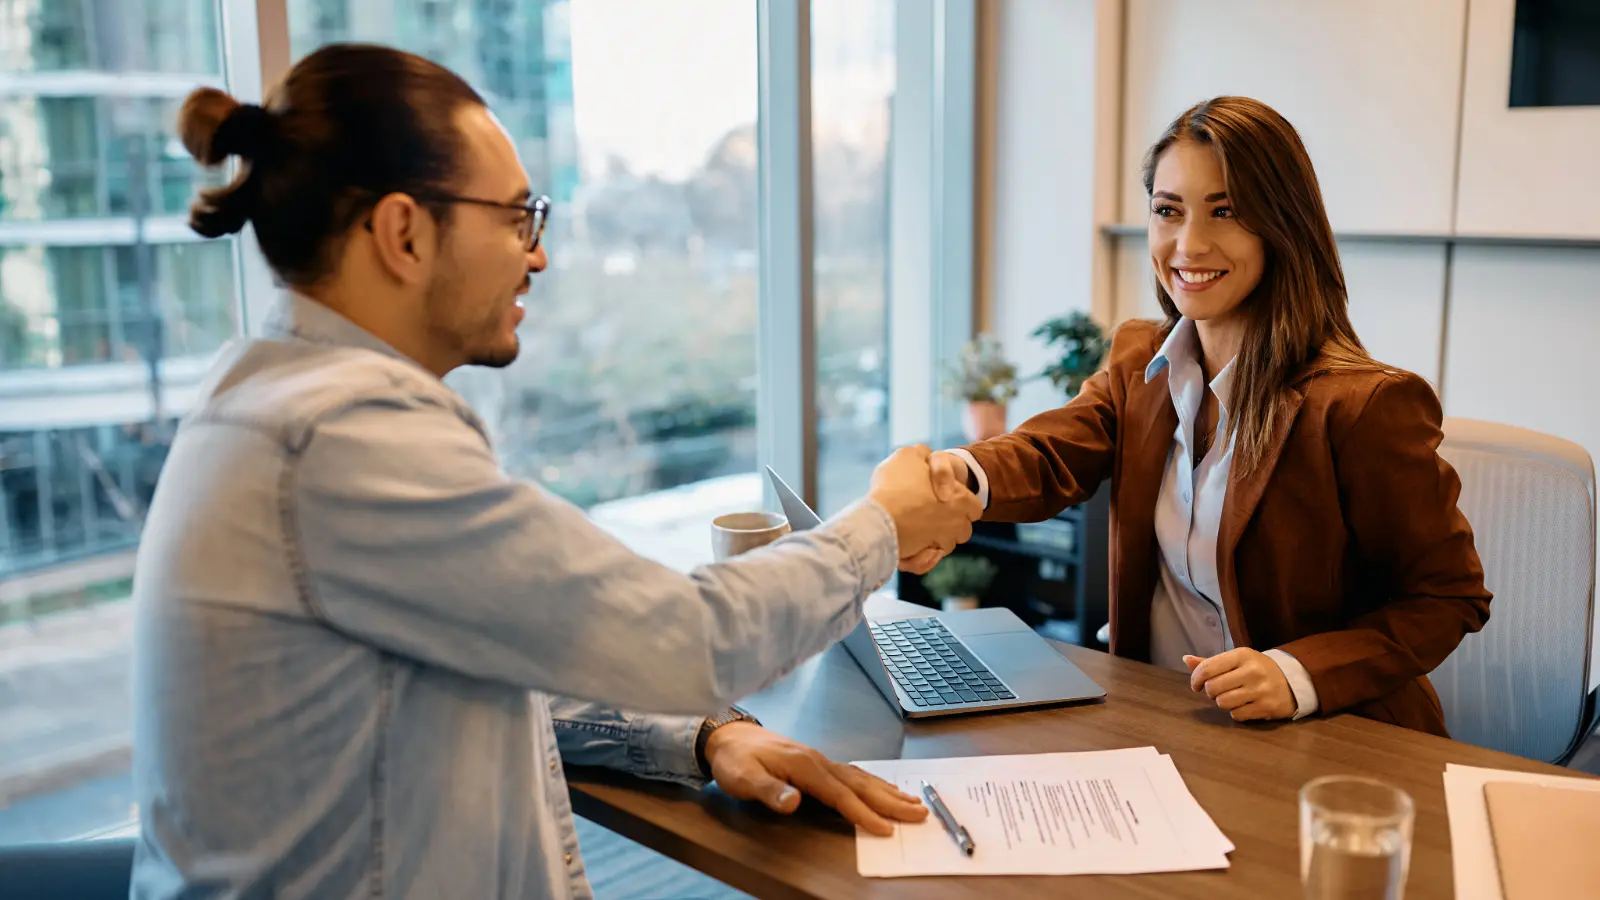 Photo of a female hiring manager shaking hands with a male job candidate. They are sitting across from each other at a desk.